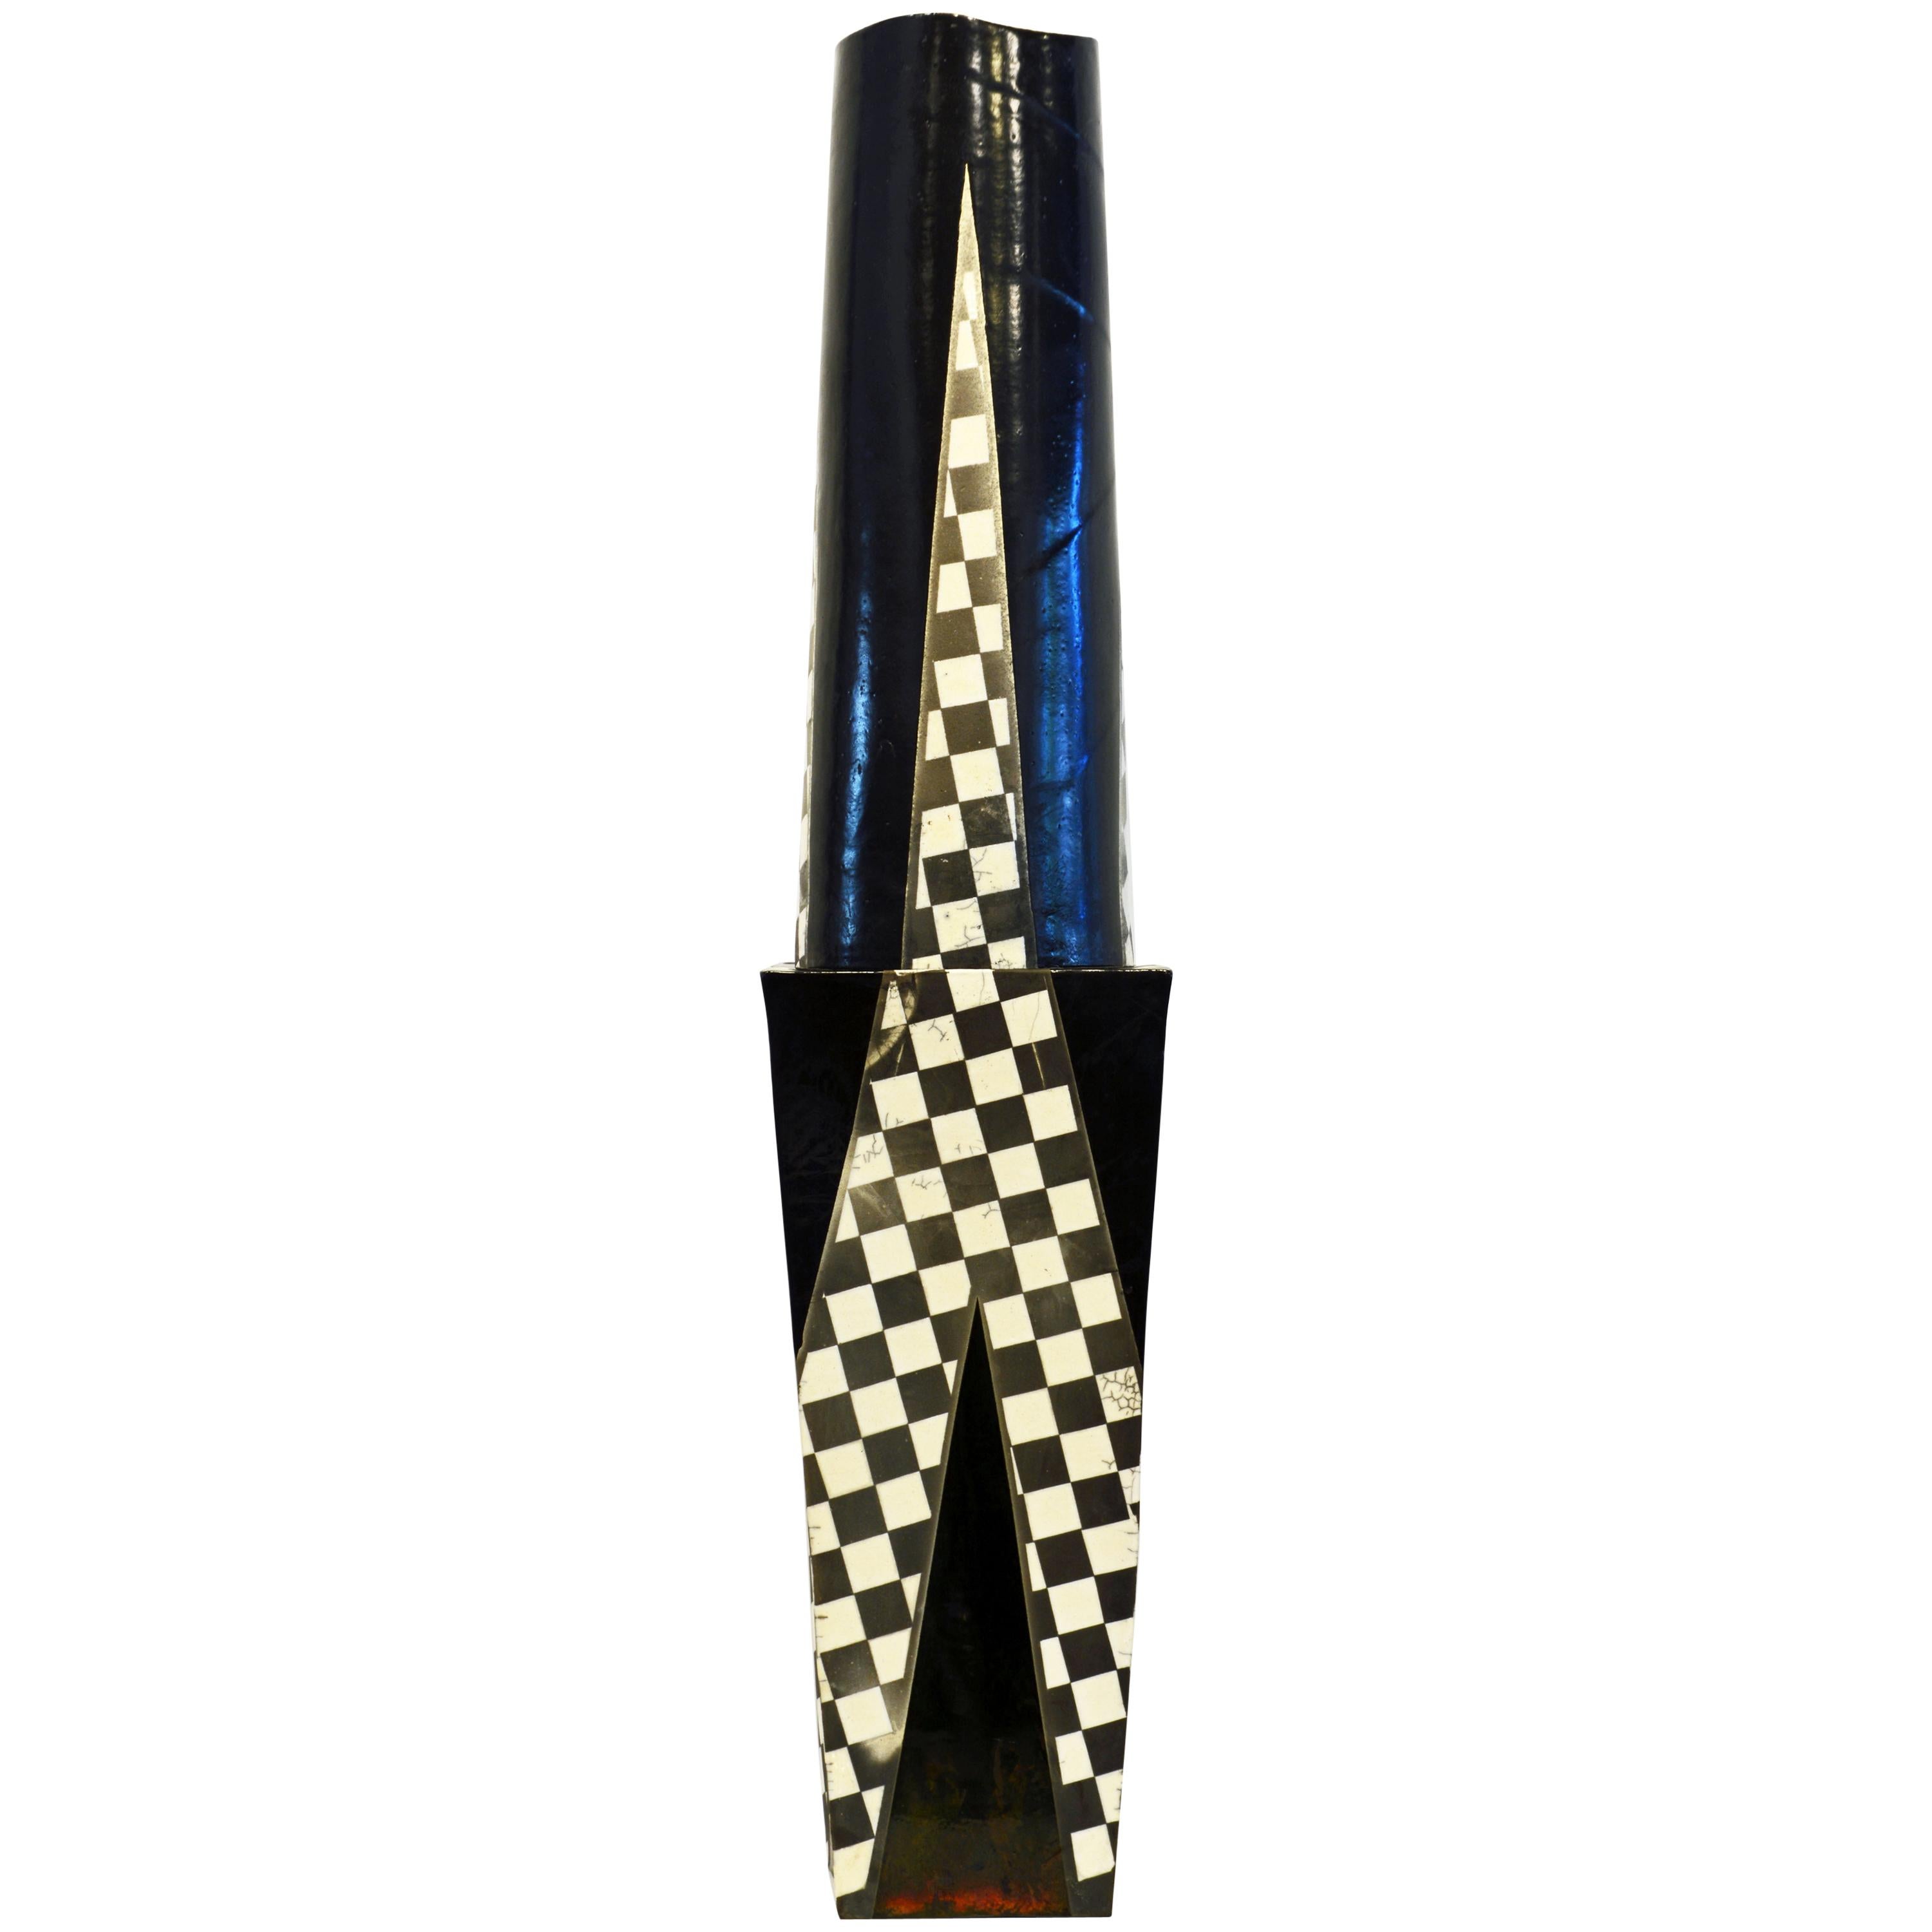 Standing more than 40 inches tall this epic Postmodern slab built glazed studio vessel or sculpture consists of a square tapering lower part with inlaid triangular checkerboard panels and slightly concave sides. On the top of this part there is a